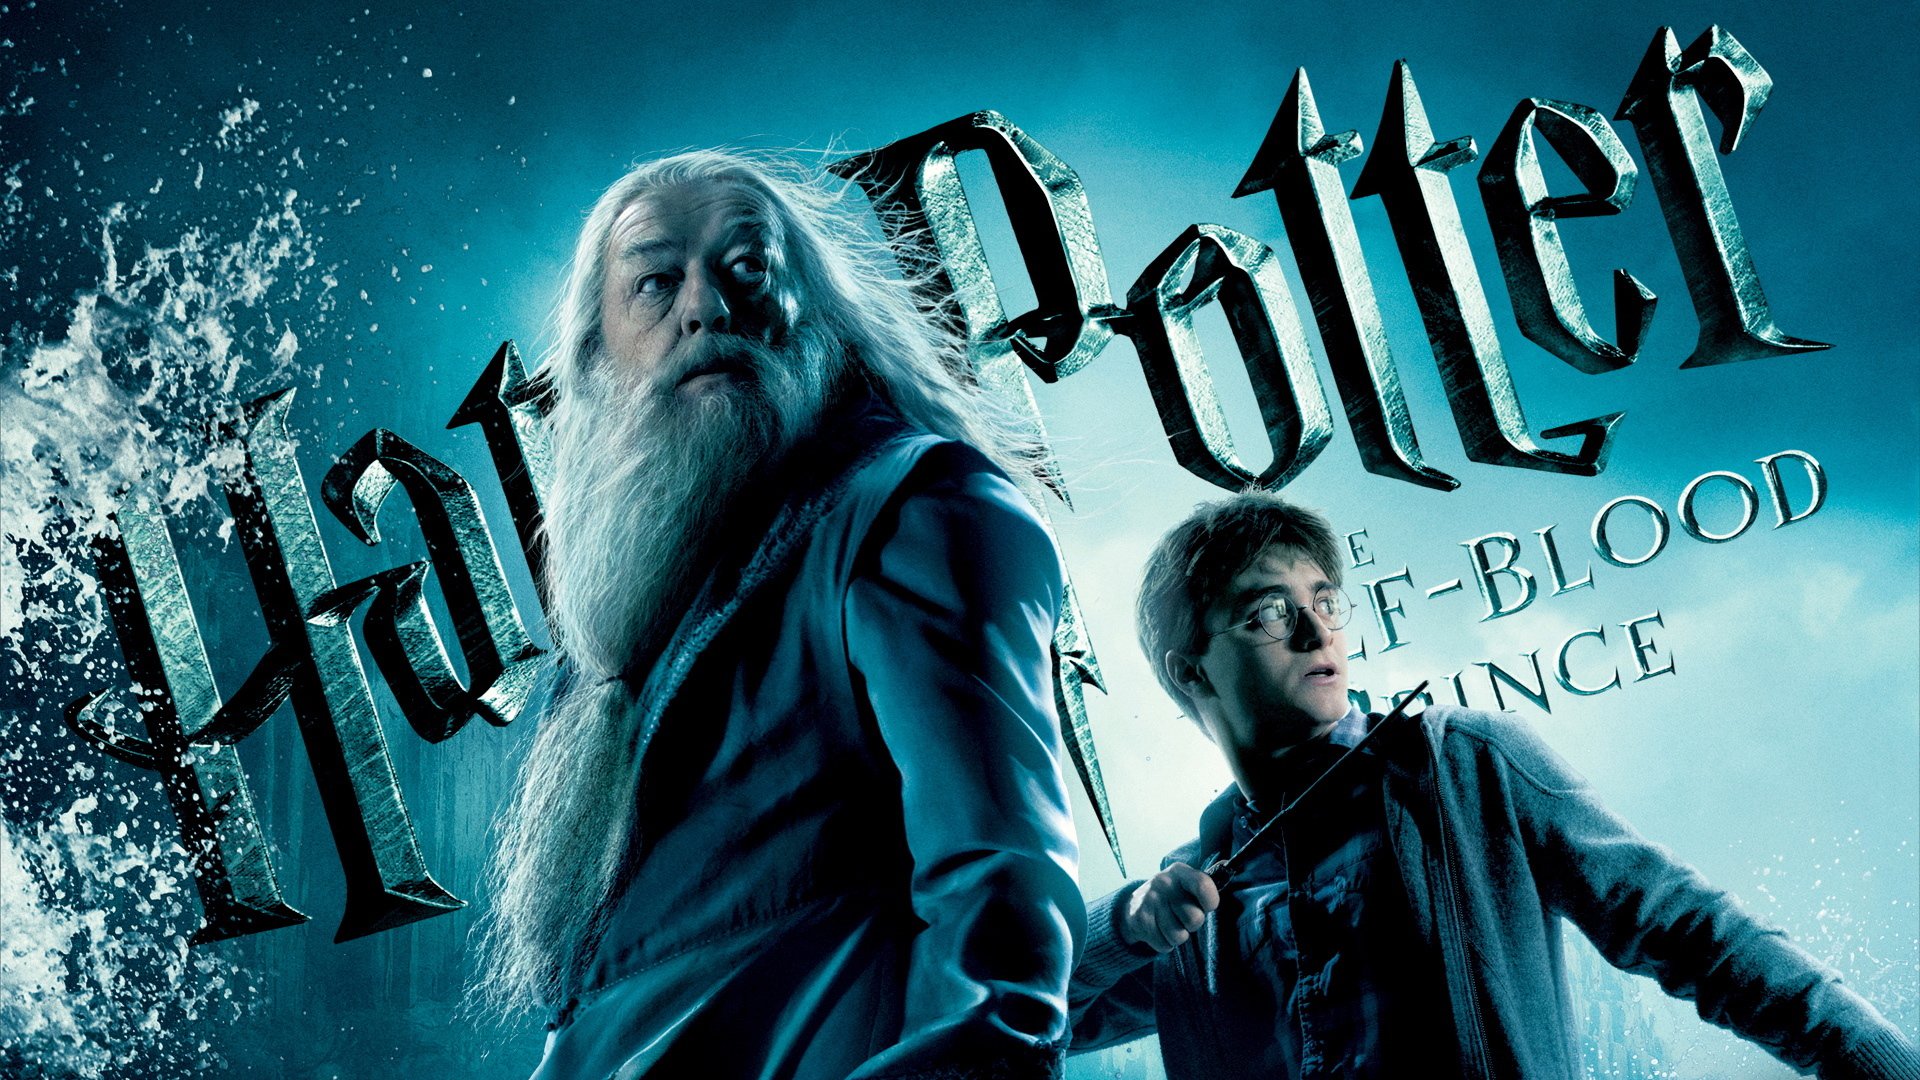 Harry Potter And The Half-Blood Prince Wallpapers